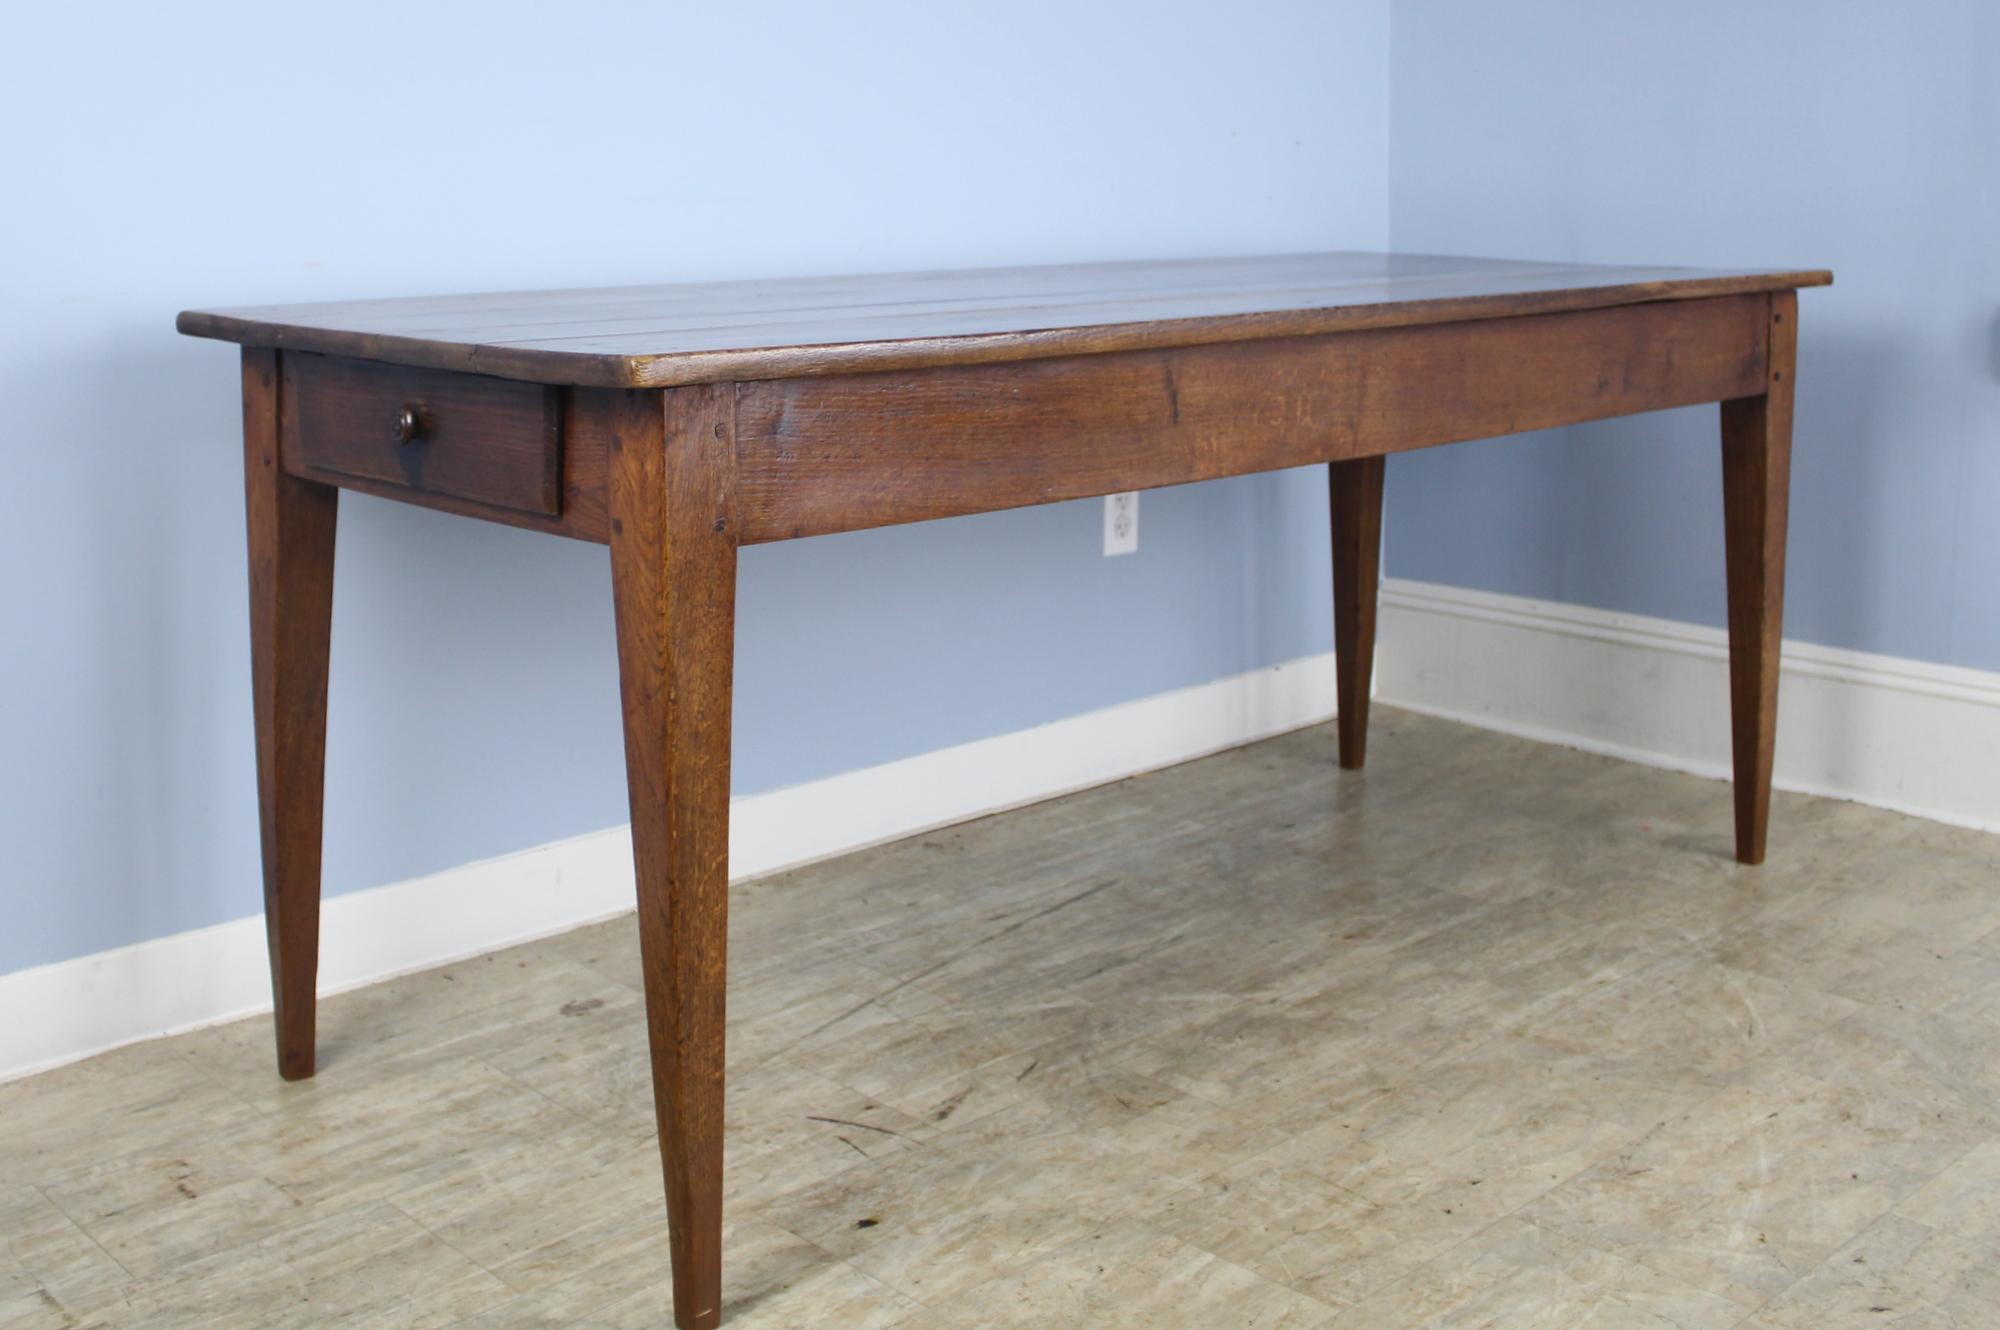 A good country oak farm table with classic tapered legs, pegged nicely at the apron. The top has a warm glowing patina with attractive grain. The apron height of 24 inches is good for knees and there are 62.5 inches between the legs on the long